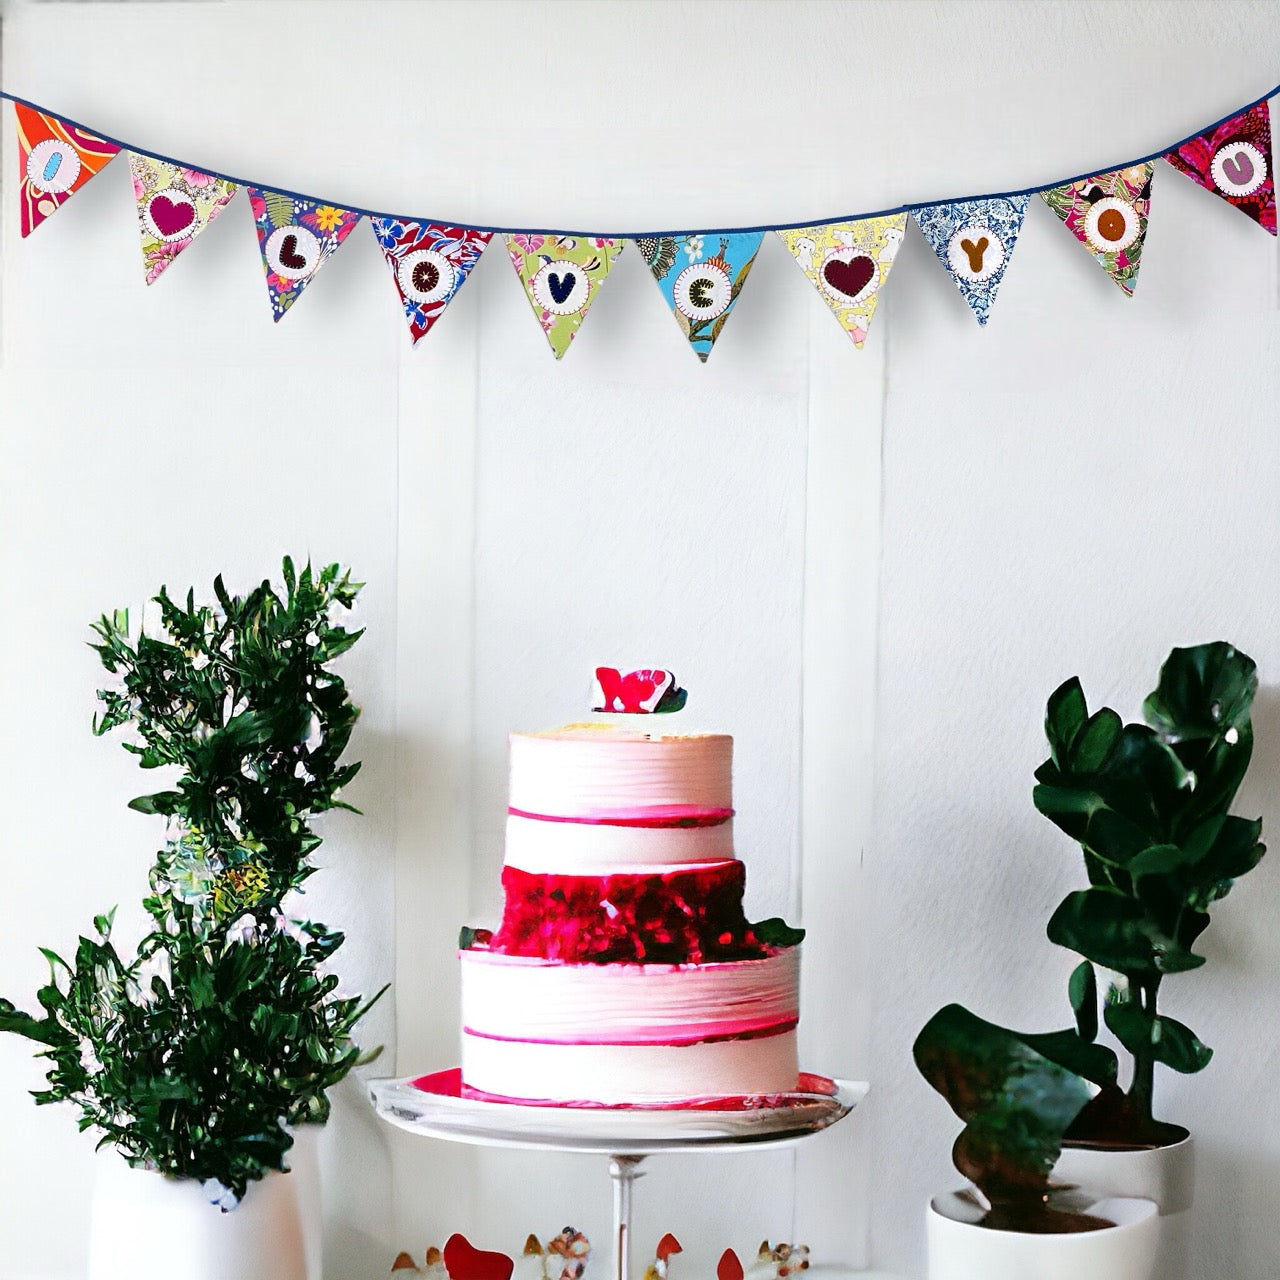 "I Love You" Upcycled Fabric Bunting